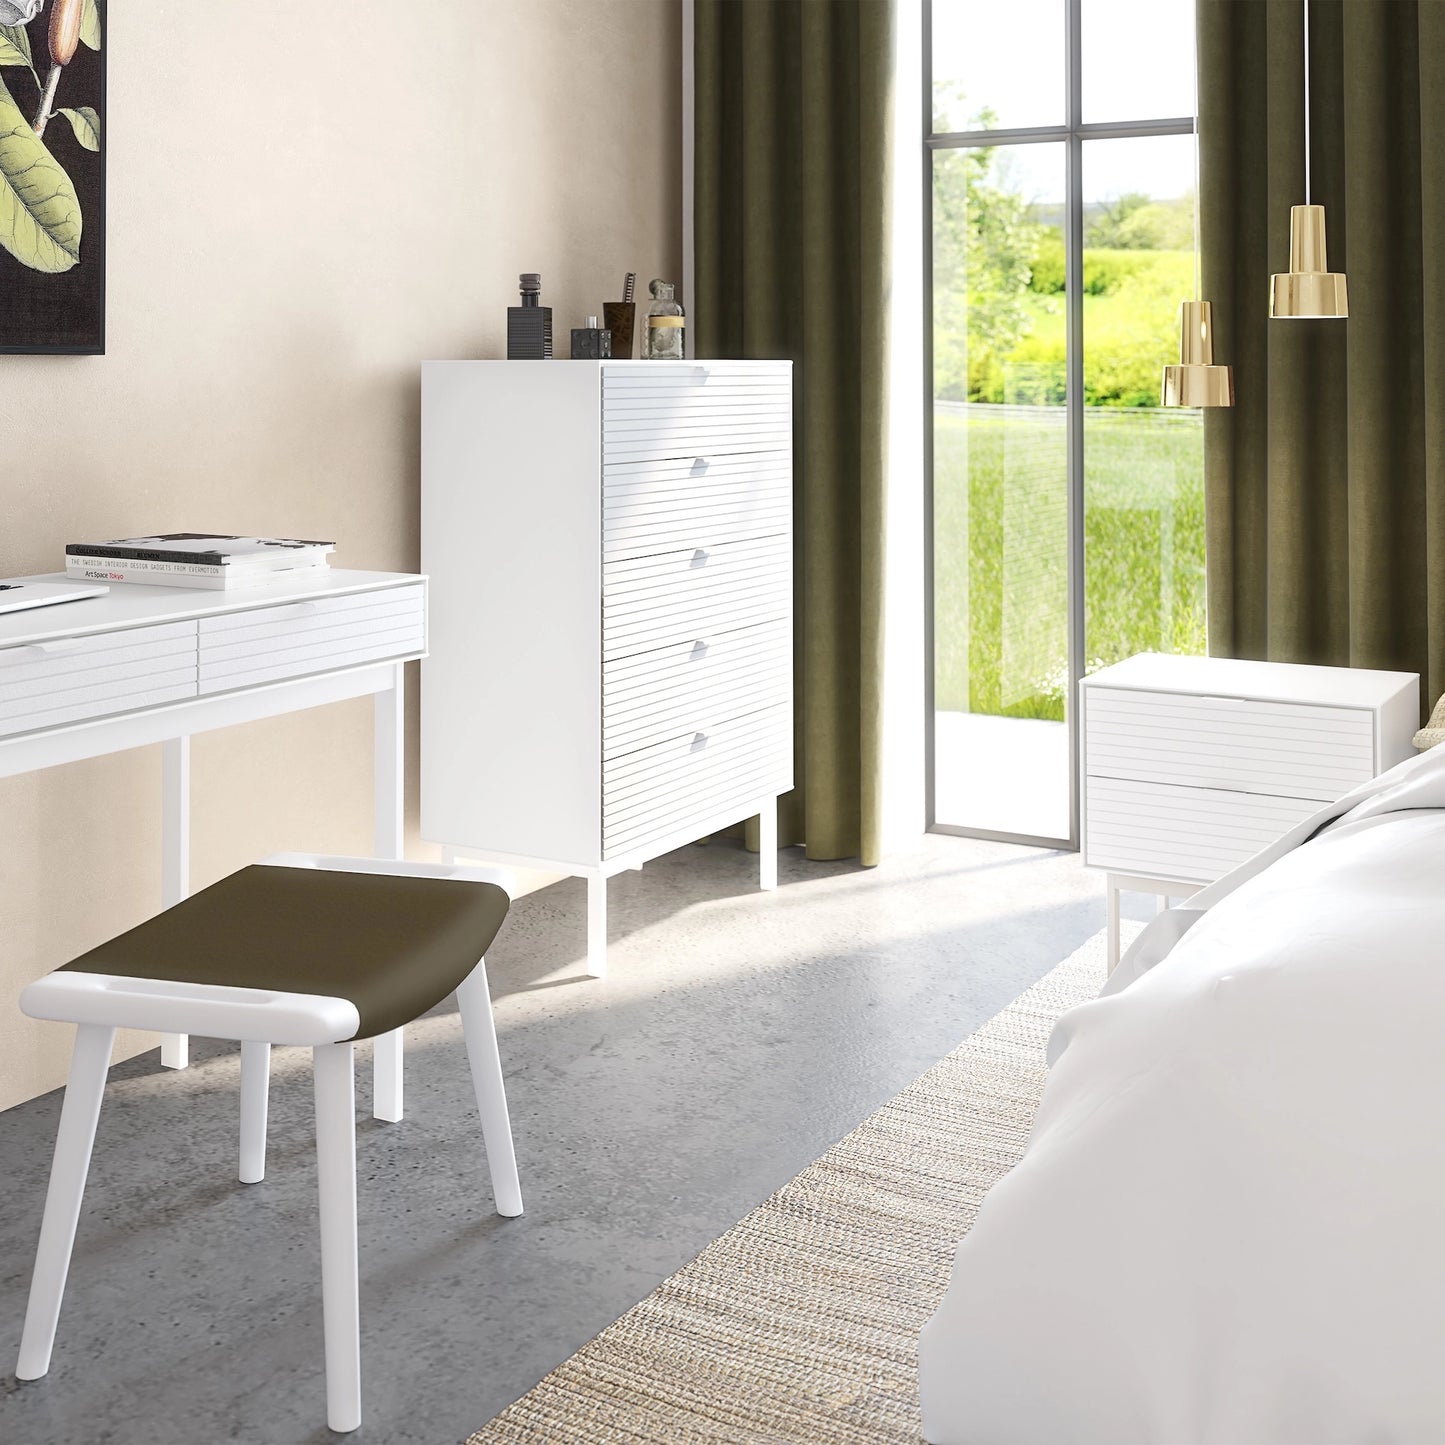 Furniture To Go Soma Bedside Table 2 Drawers Granulated Pure White Brushed White